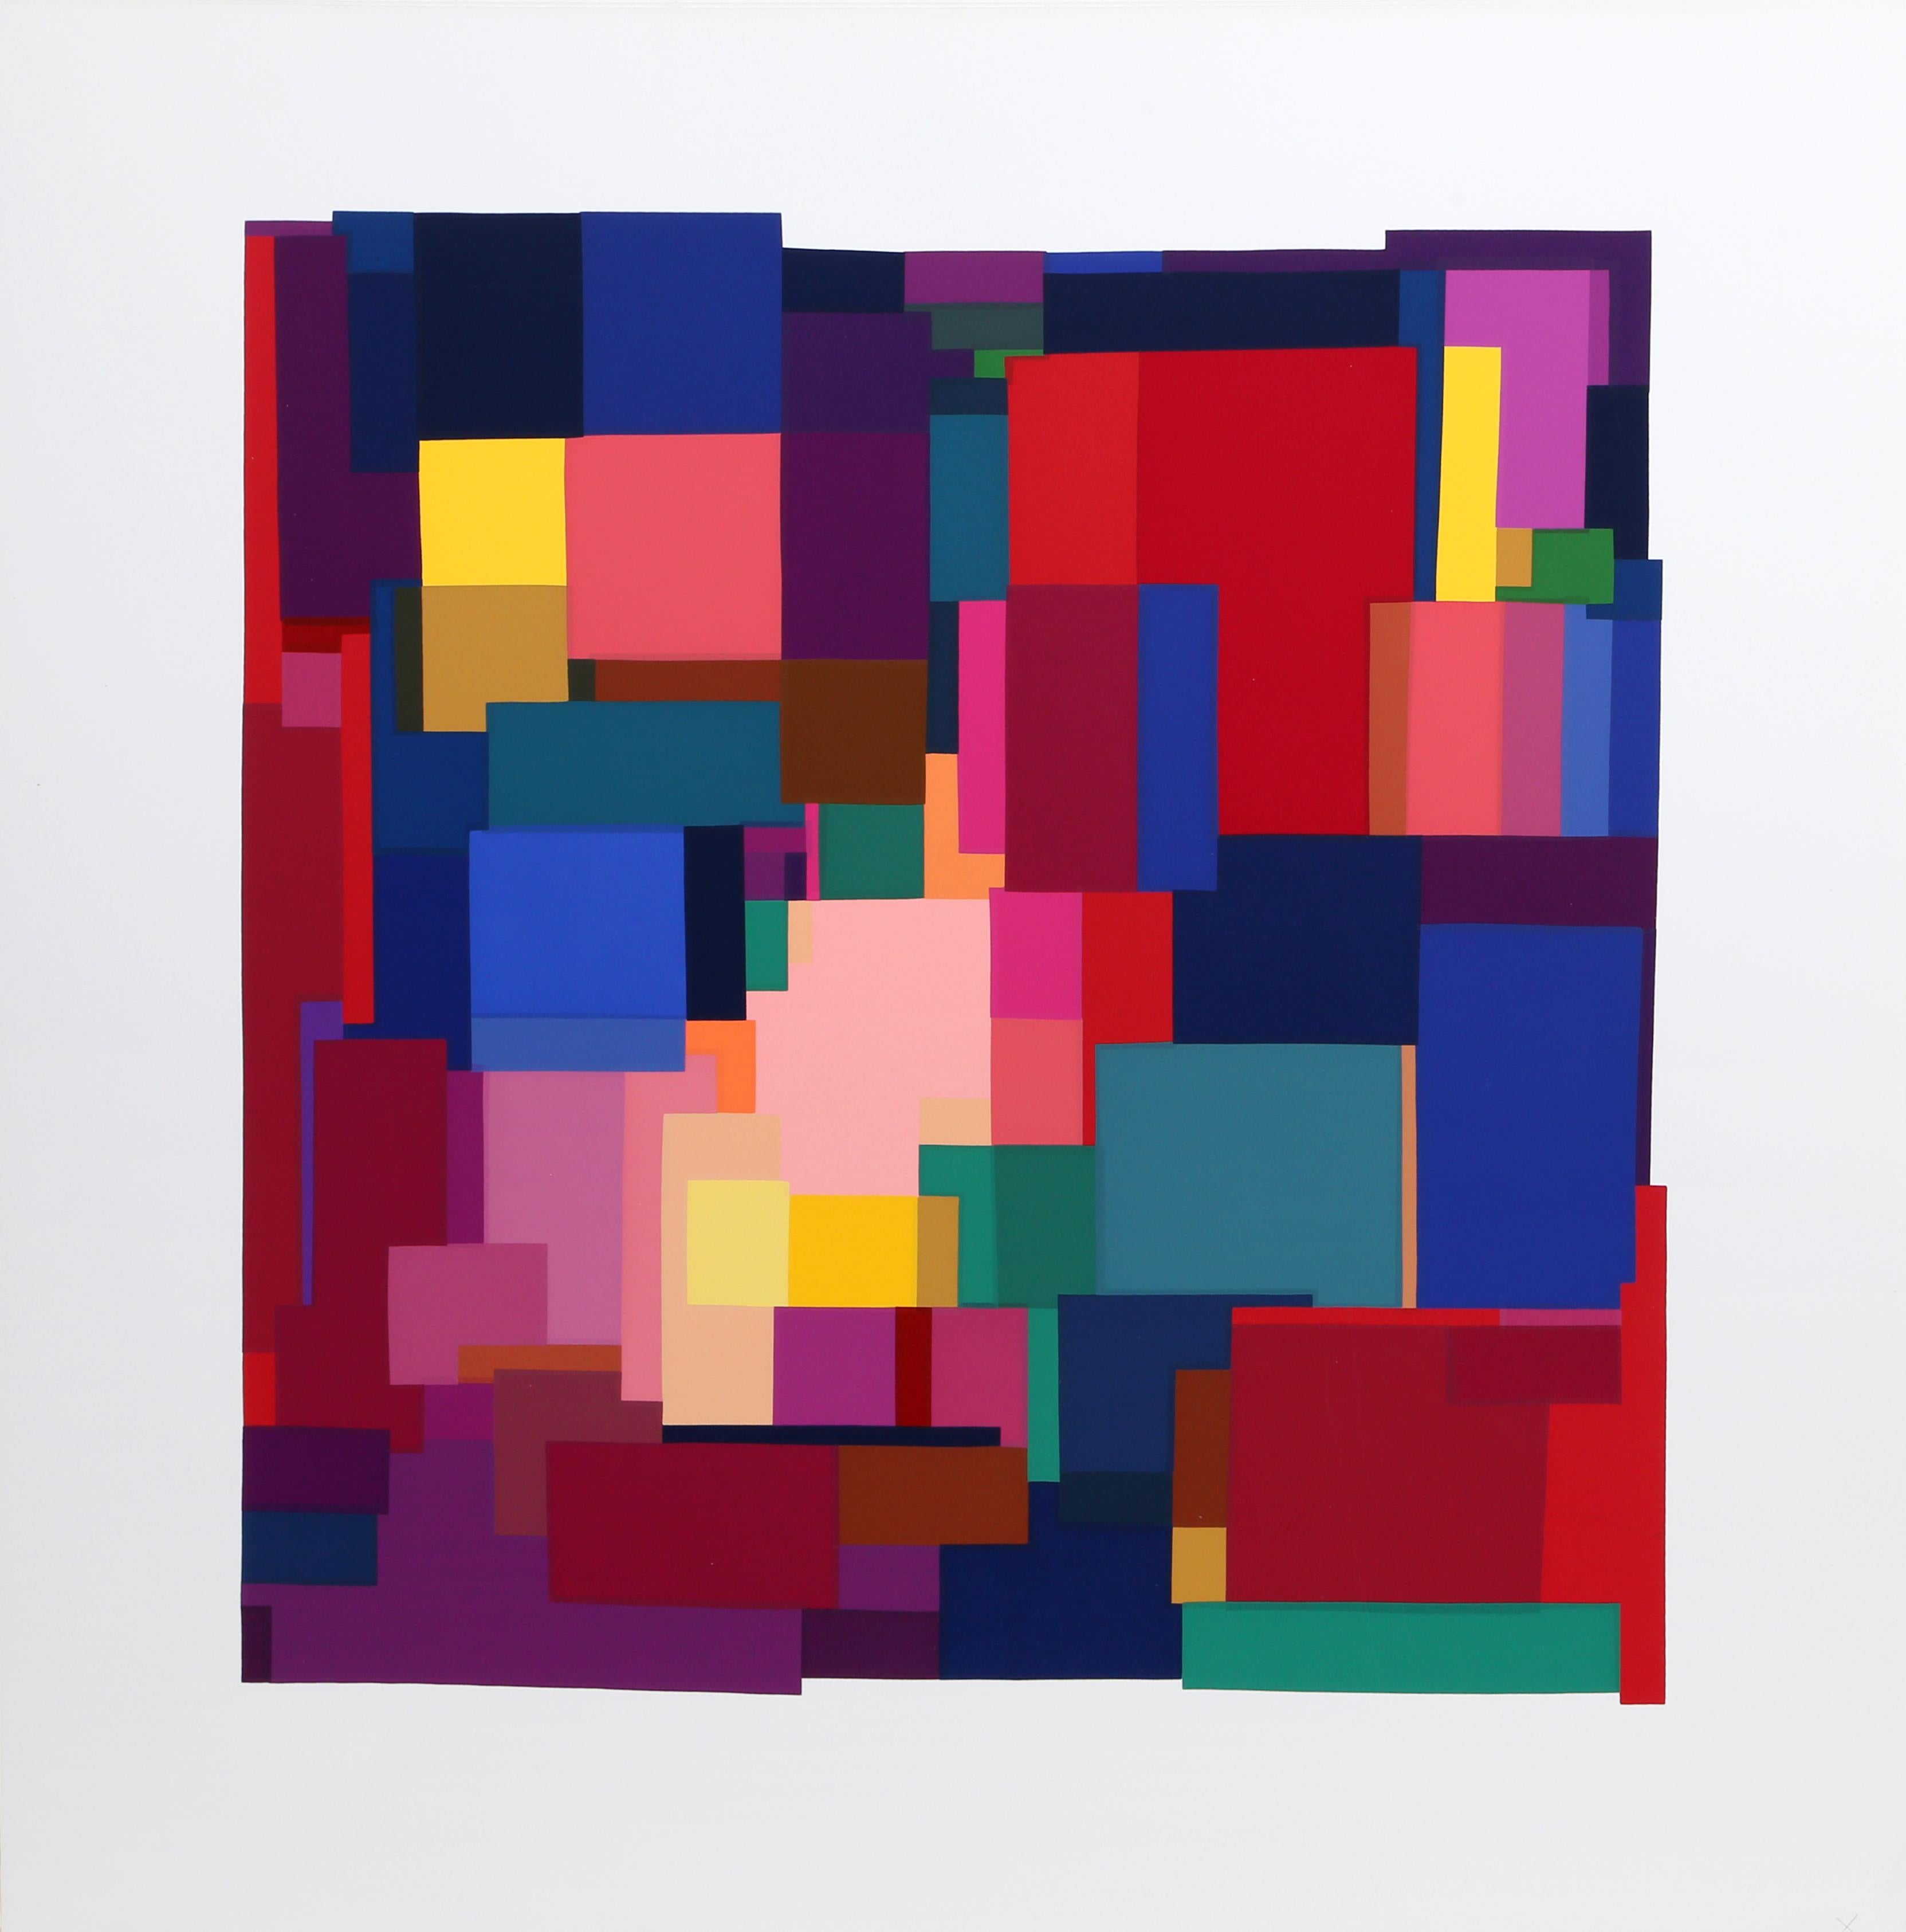 A colorful geometric screenprint by American artist Barbara Lynch Zinkel.

Date: 1994
Medium: Screenprint, estate stamped verso and numbered in pencil
Edition: 250
Image Size: 23 x 22.75 inches
Size : 30.25 x 30 in. (76.84 x 76.2 cm)